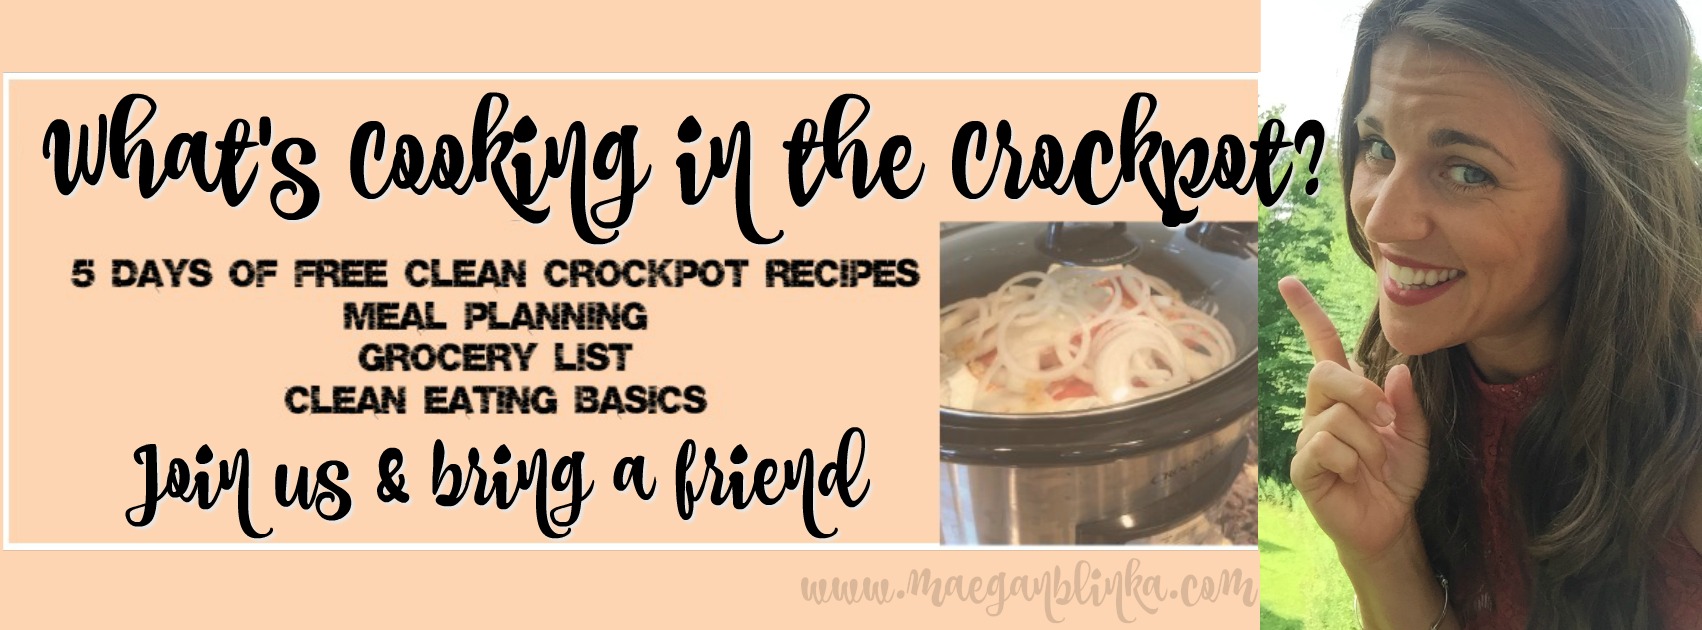 What's cooking in the crockpot cover.jpg